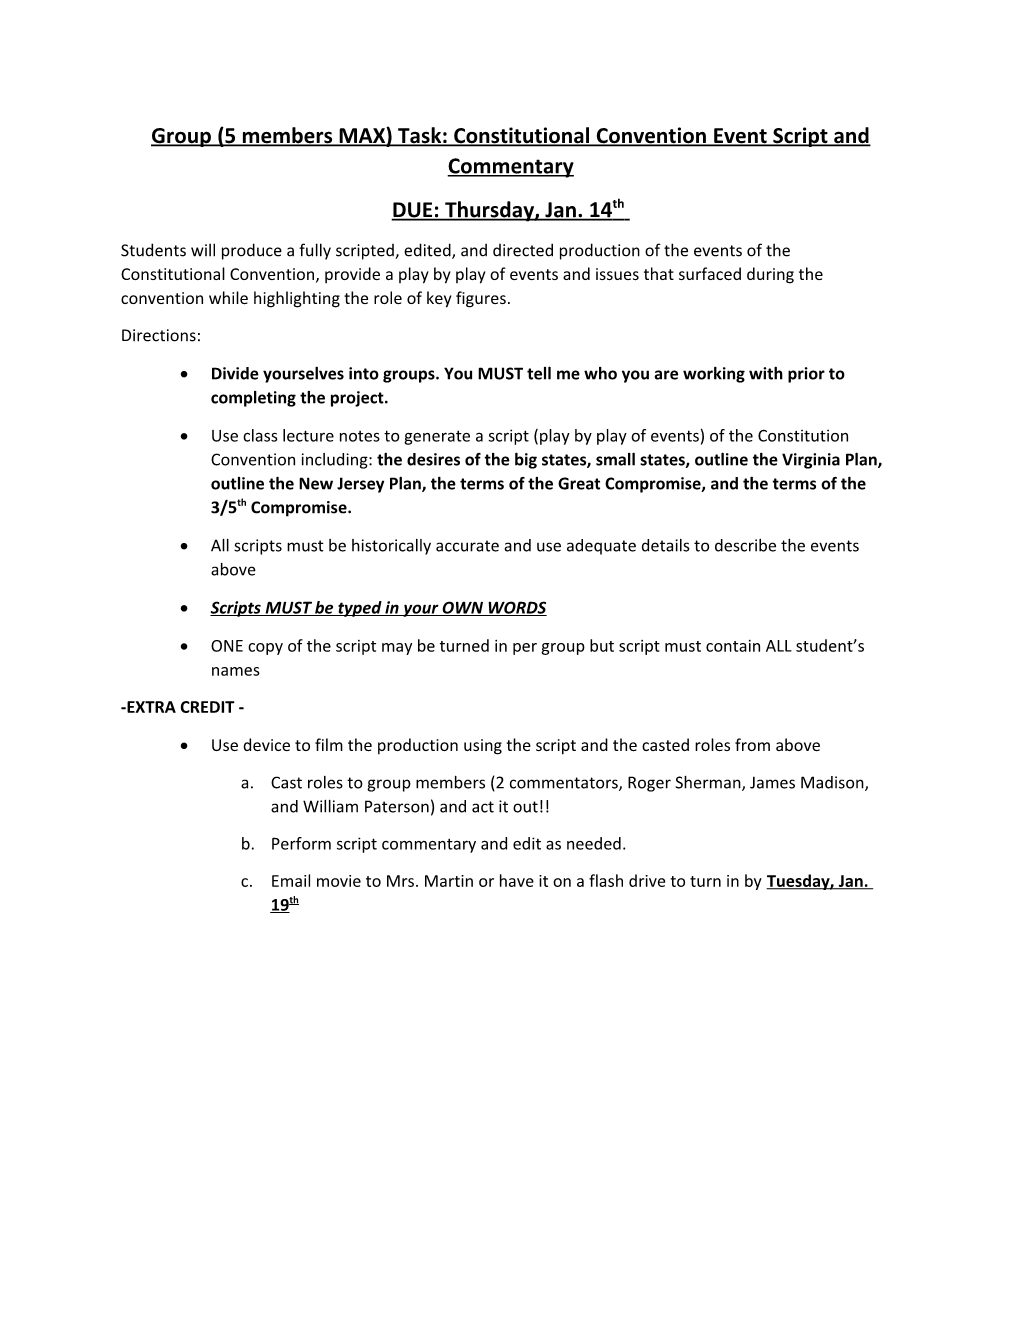 Group (5 Members MAX) Task: Constitutional Convention Event Script and Commentary